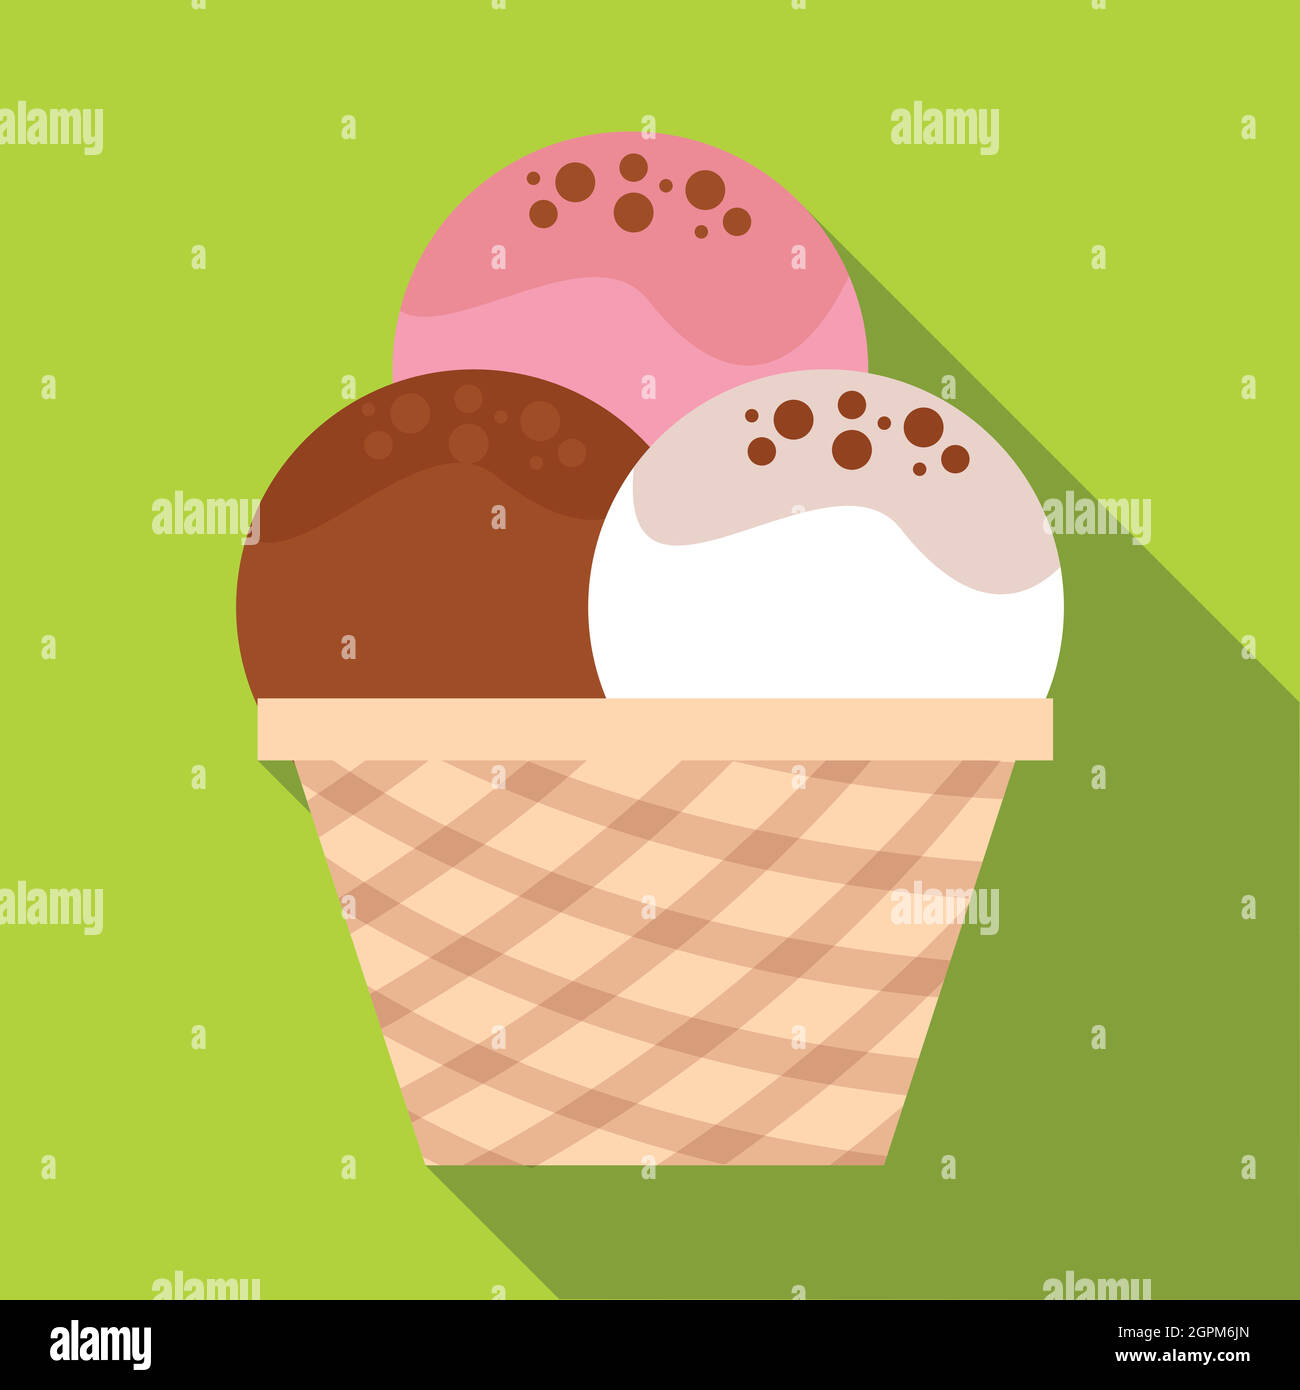 Mixed ice cream scoops in waffle bowl icon Stock Vector